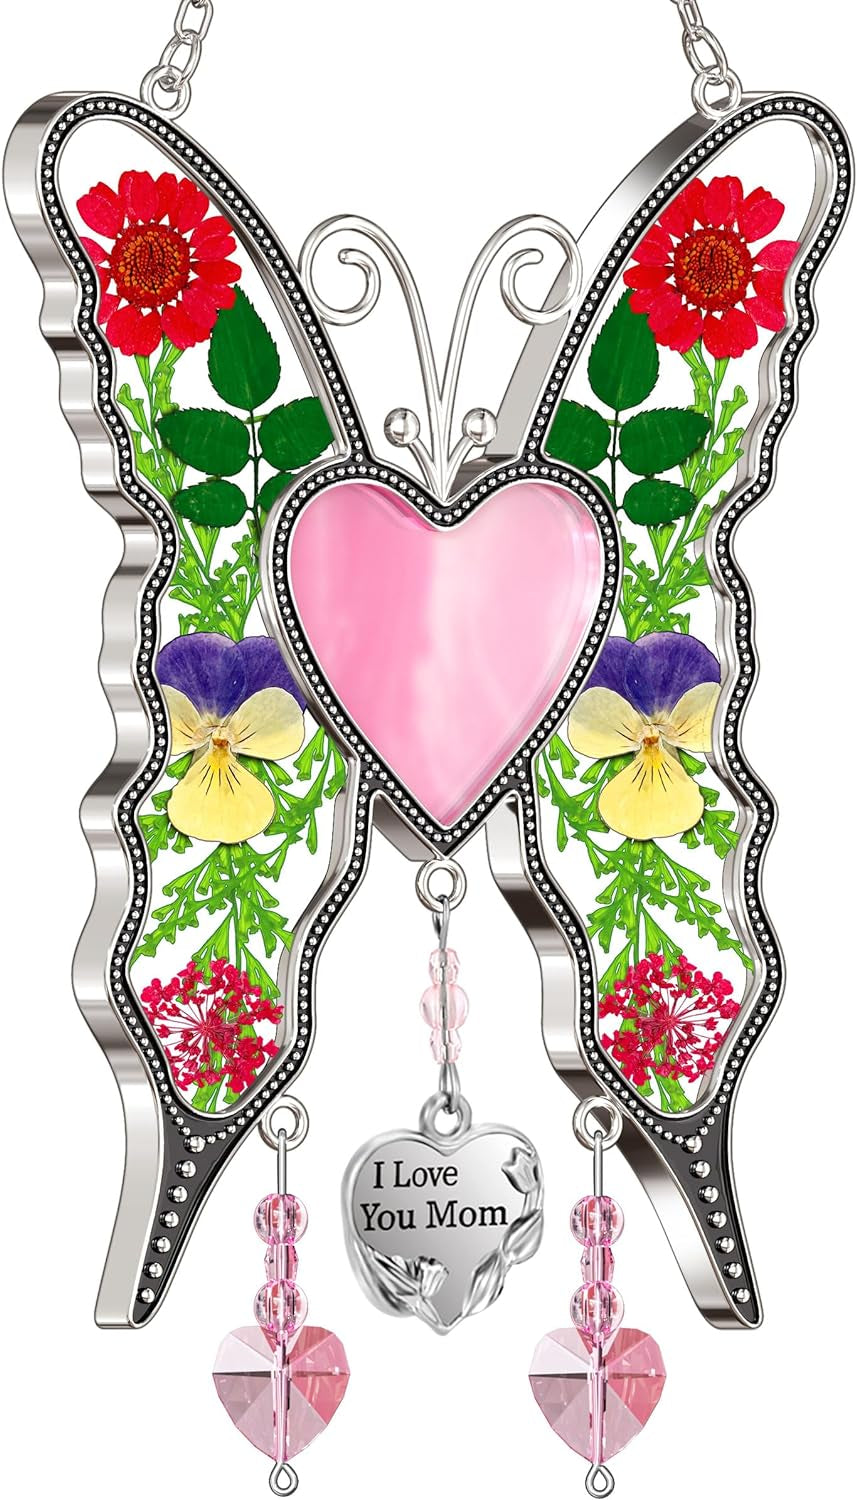 Butterfly Suncatcher I Love You Mom Gifts for Mom Pink Stained Glass Panels Heart for Windows Hanging Wind Chimes Pressed Real Flowers Wings Unique Design Birthday Gift for Women